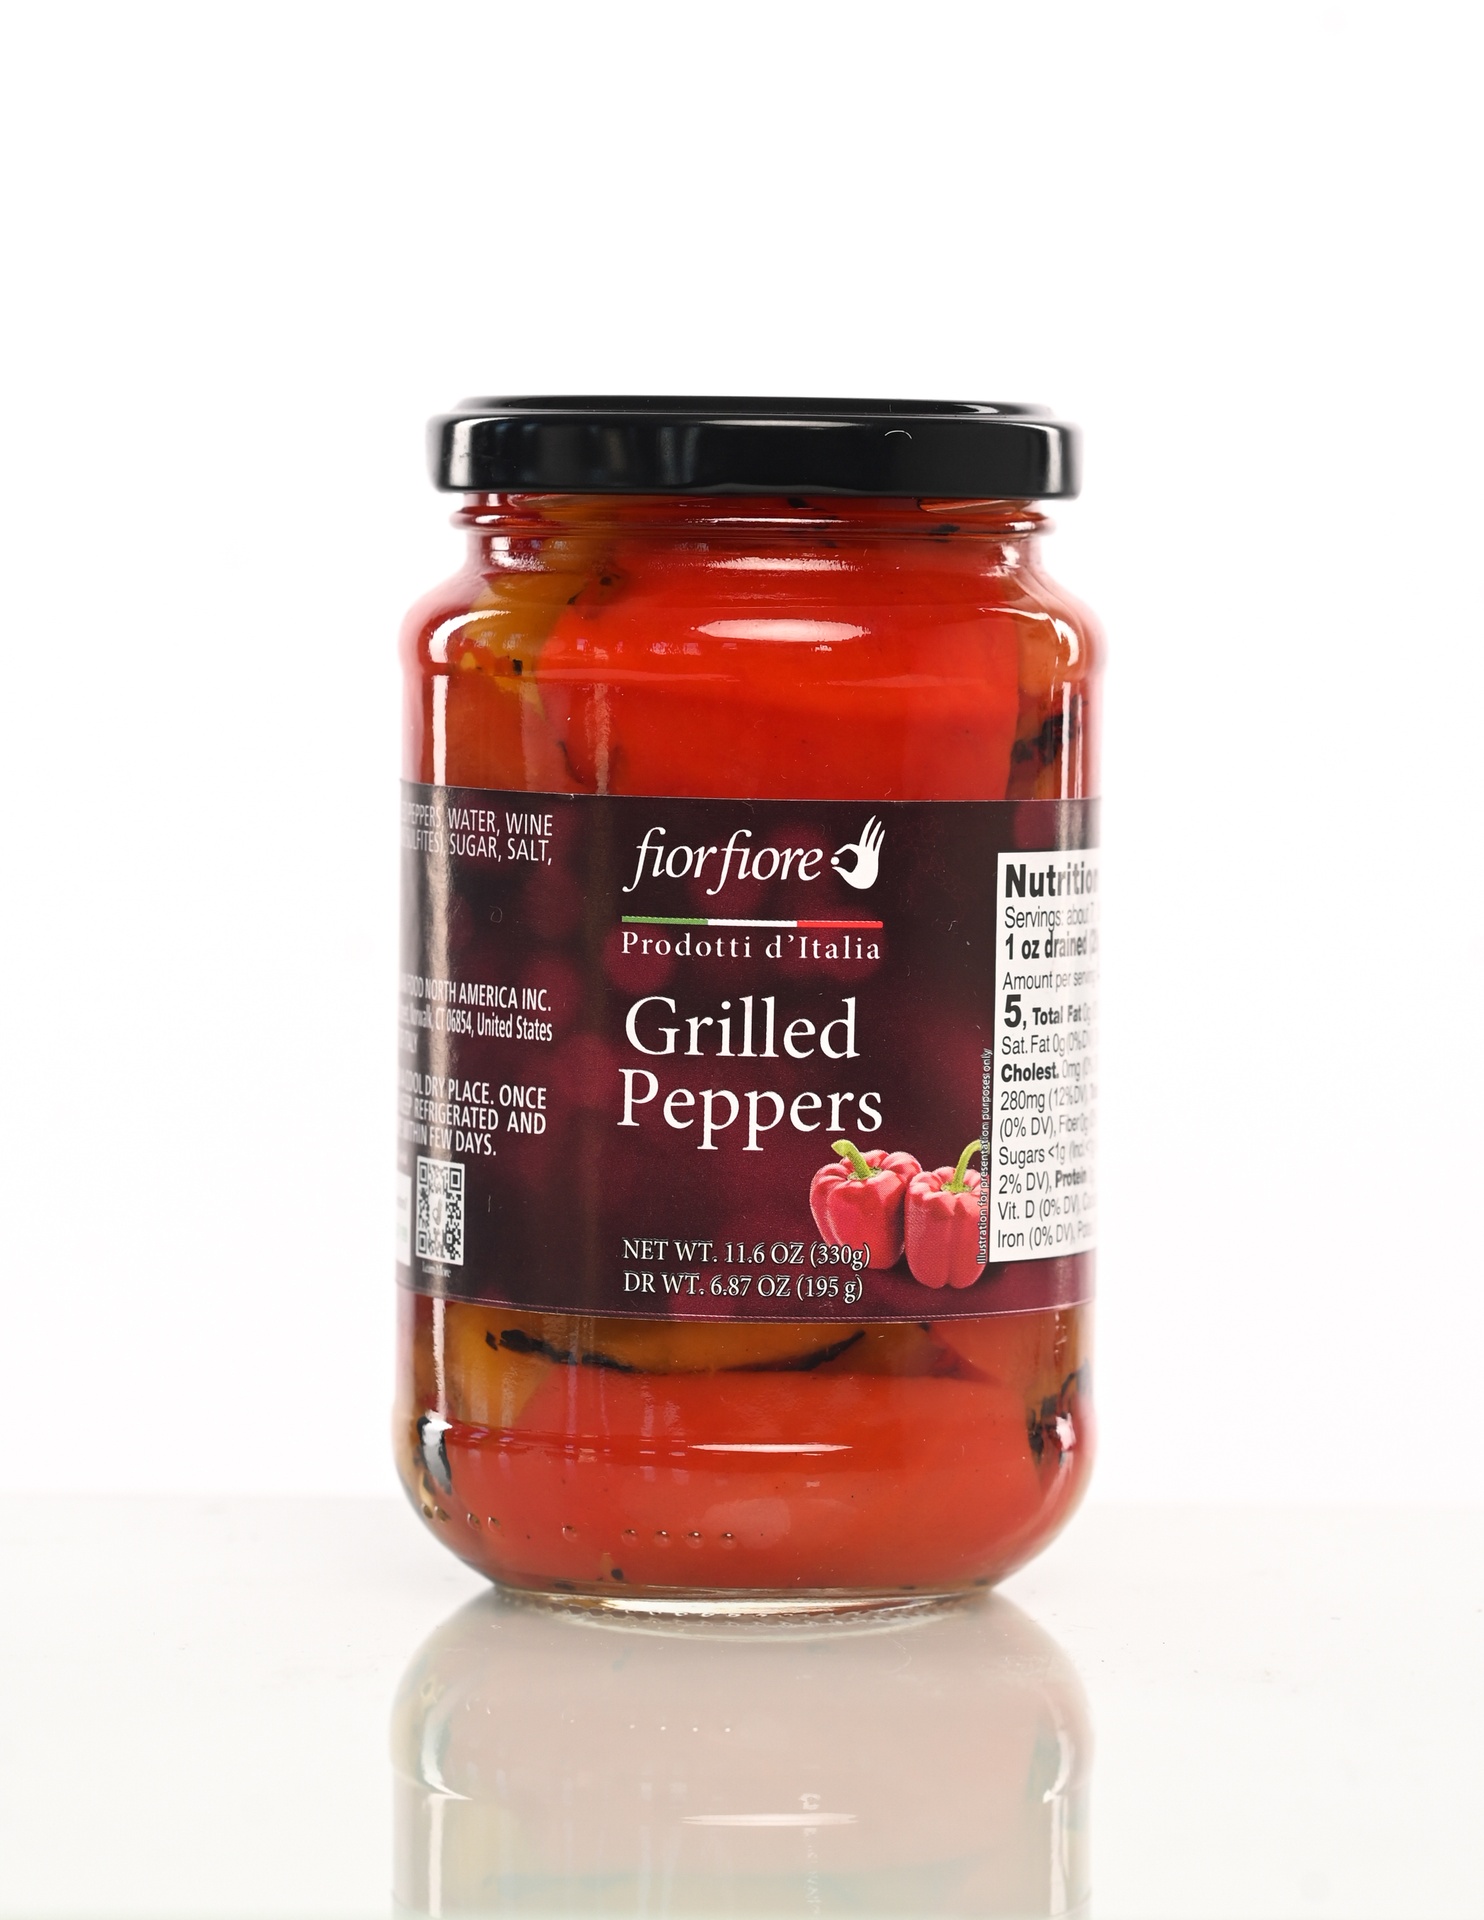 Fiorfiore Grilled Peppers au natural 330 g (11,64 oz)